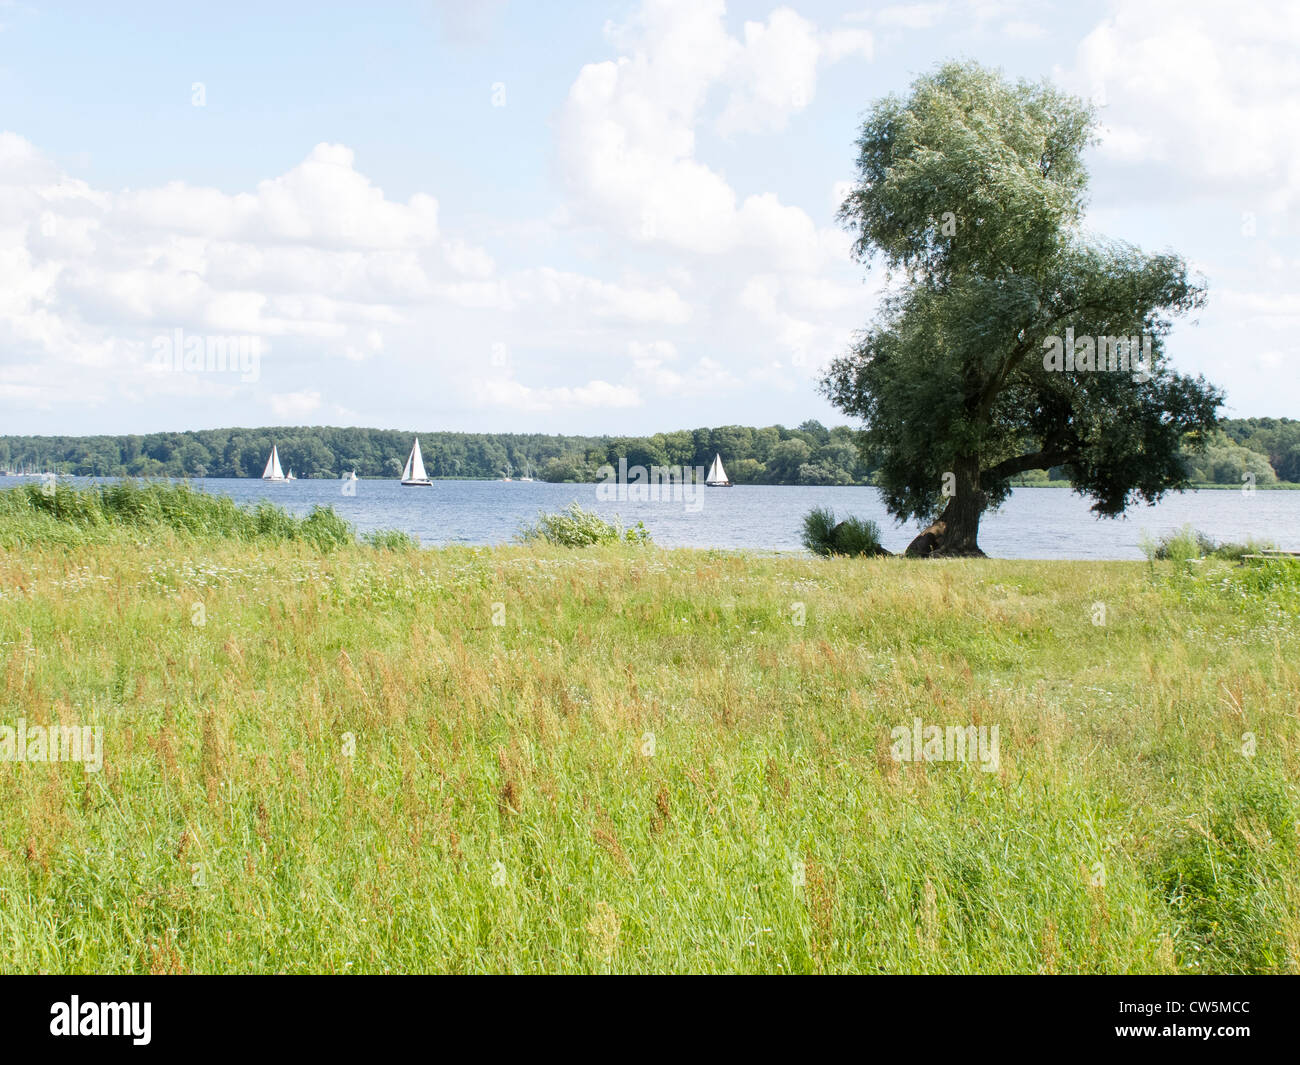 The Havel at Kladow outside of Berlin Stock Photo